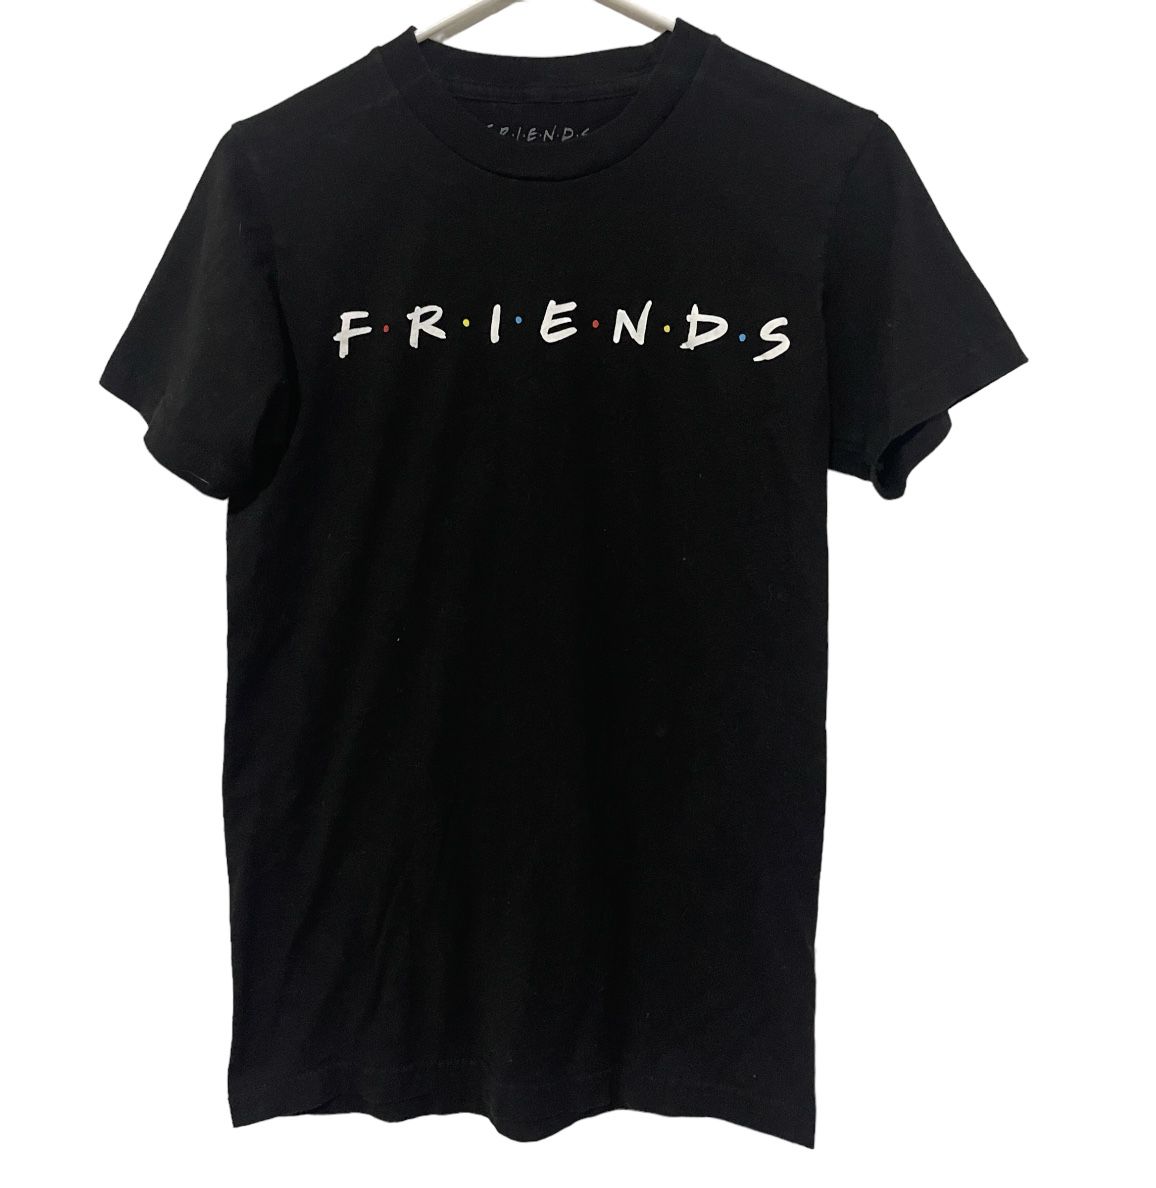 Friends Shirt Women Size Small The Television Series Short Sleeve Crew Neck Tee